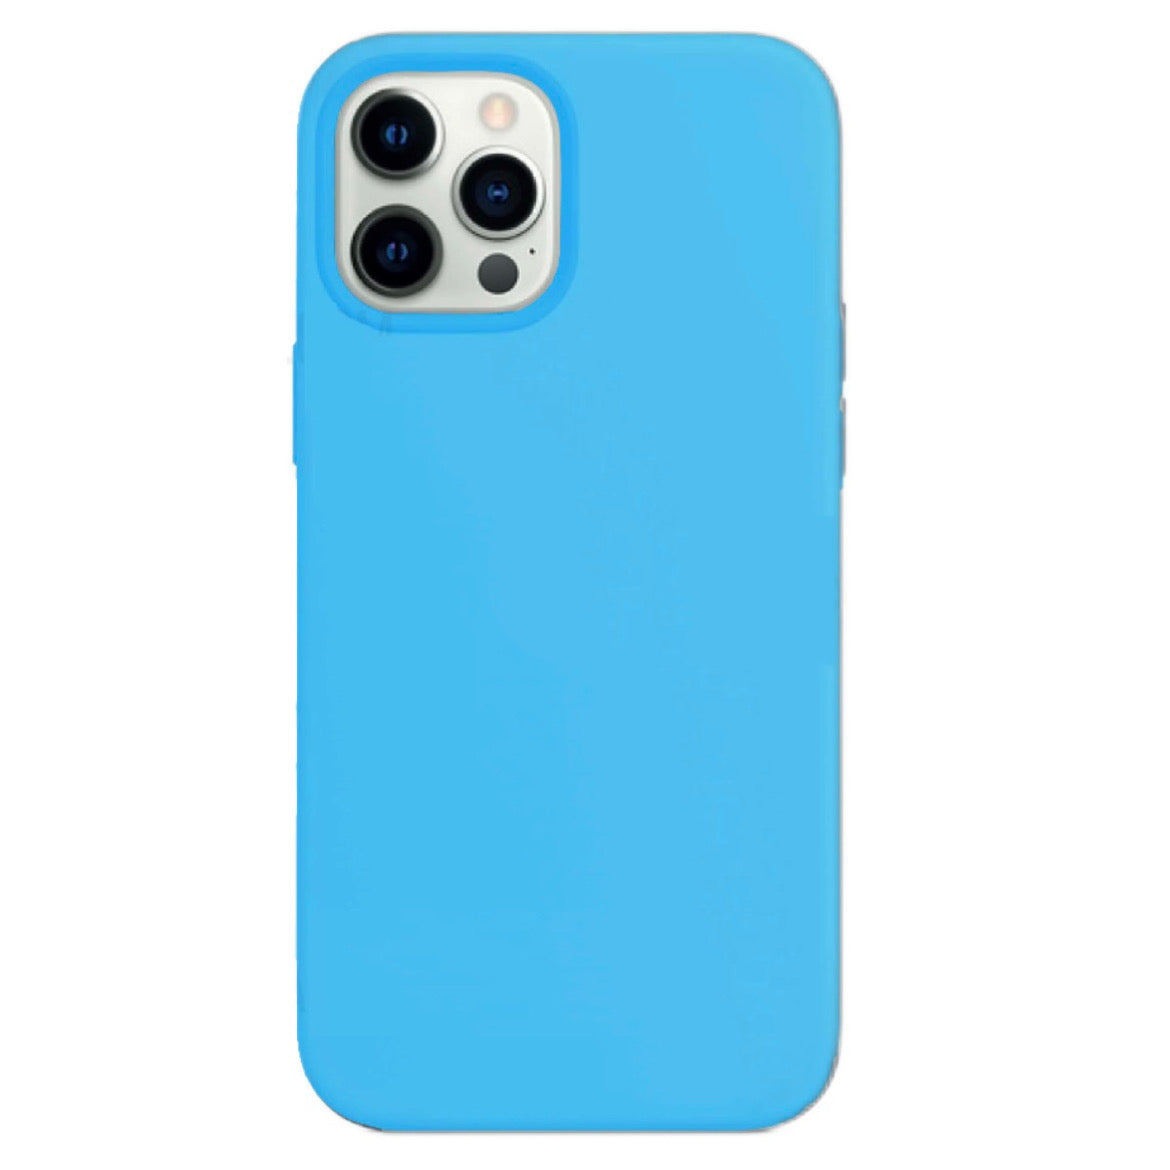 Cases For iPhone 13 Pro Max saynama